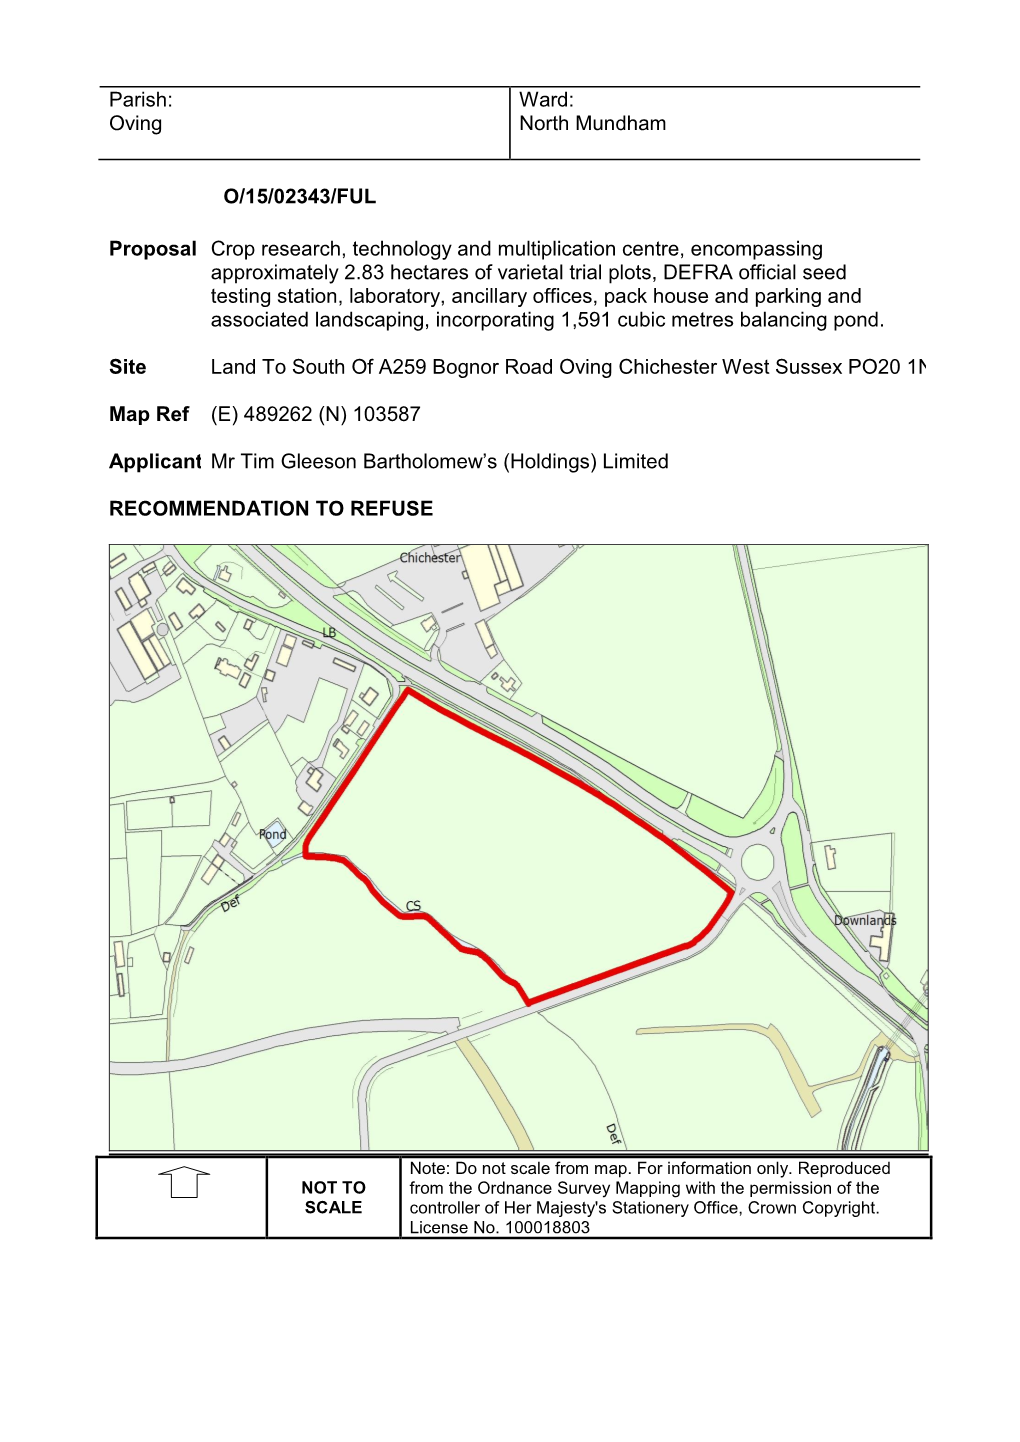 Land to South of A259 Bognor Road Oving Chichester West Sussex PO20 1NW